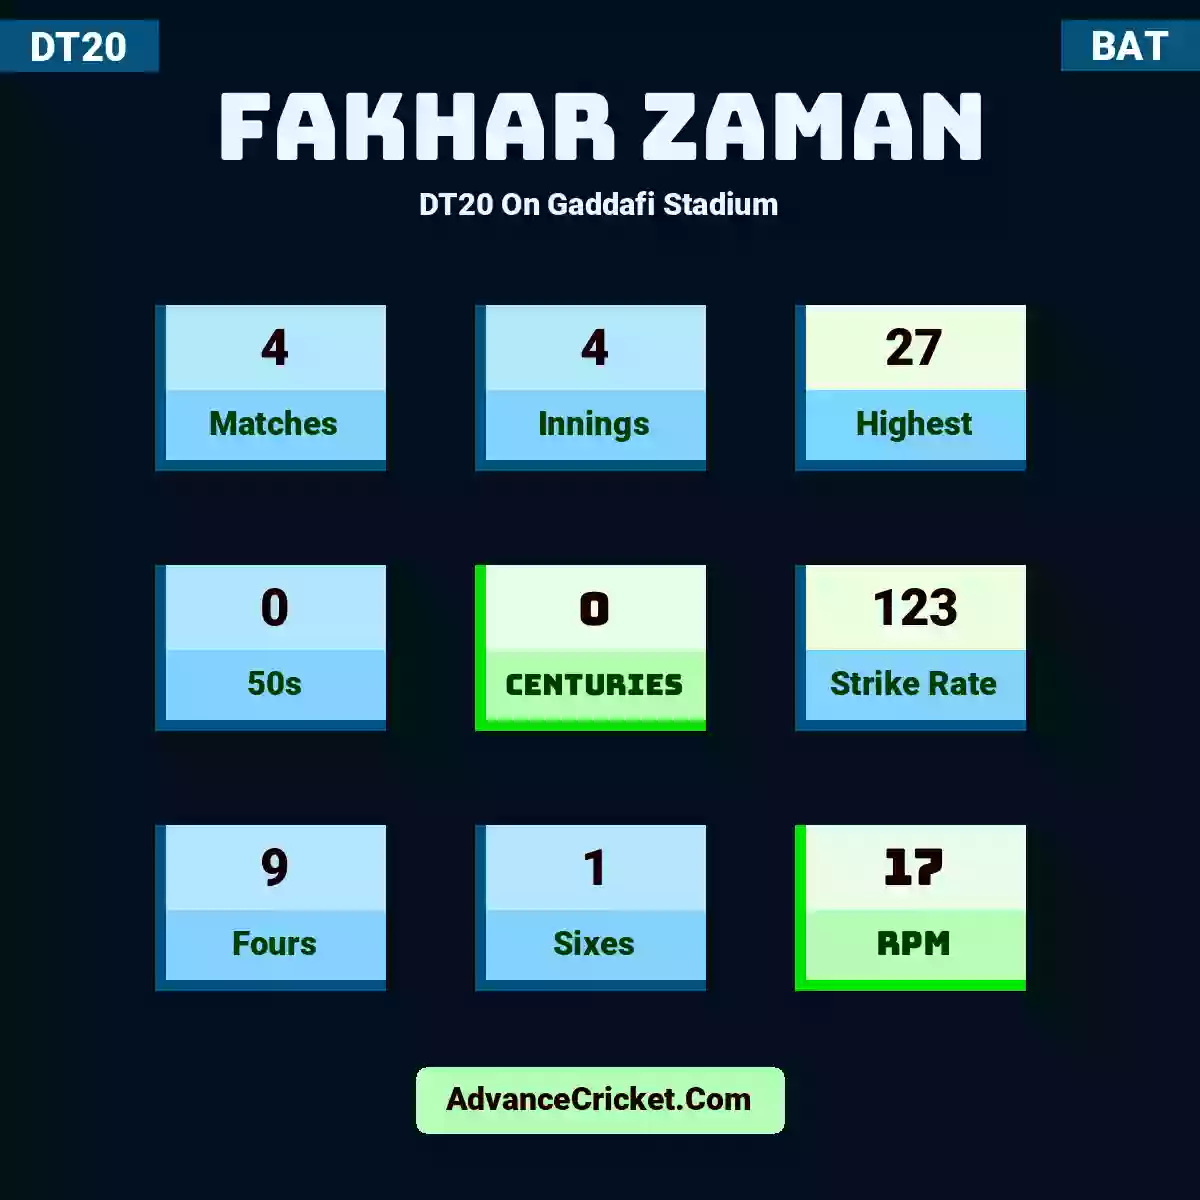 Fakhar Zaman DT20  On Gaddafi Stadium, Fakhar Zaman played 4 matches, scored 27 runs as highest, 0 half-centuries, and 0 centuries, with a strike rate of 123. F.Zaman hit 9 fours and 1 sixes, with an RPM of 17.